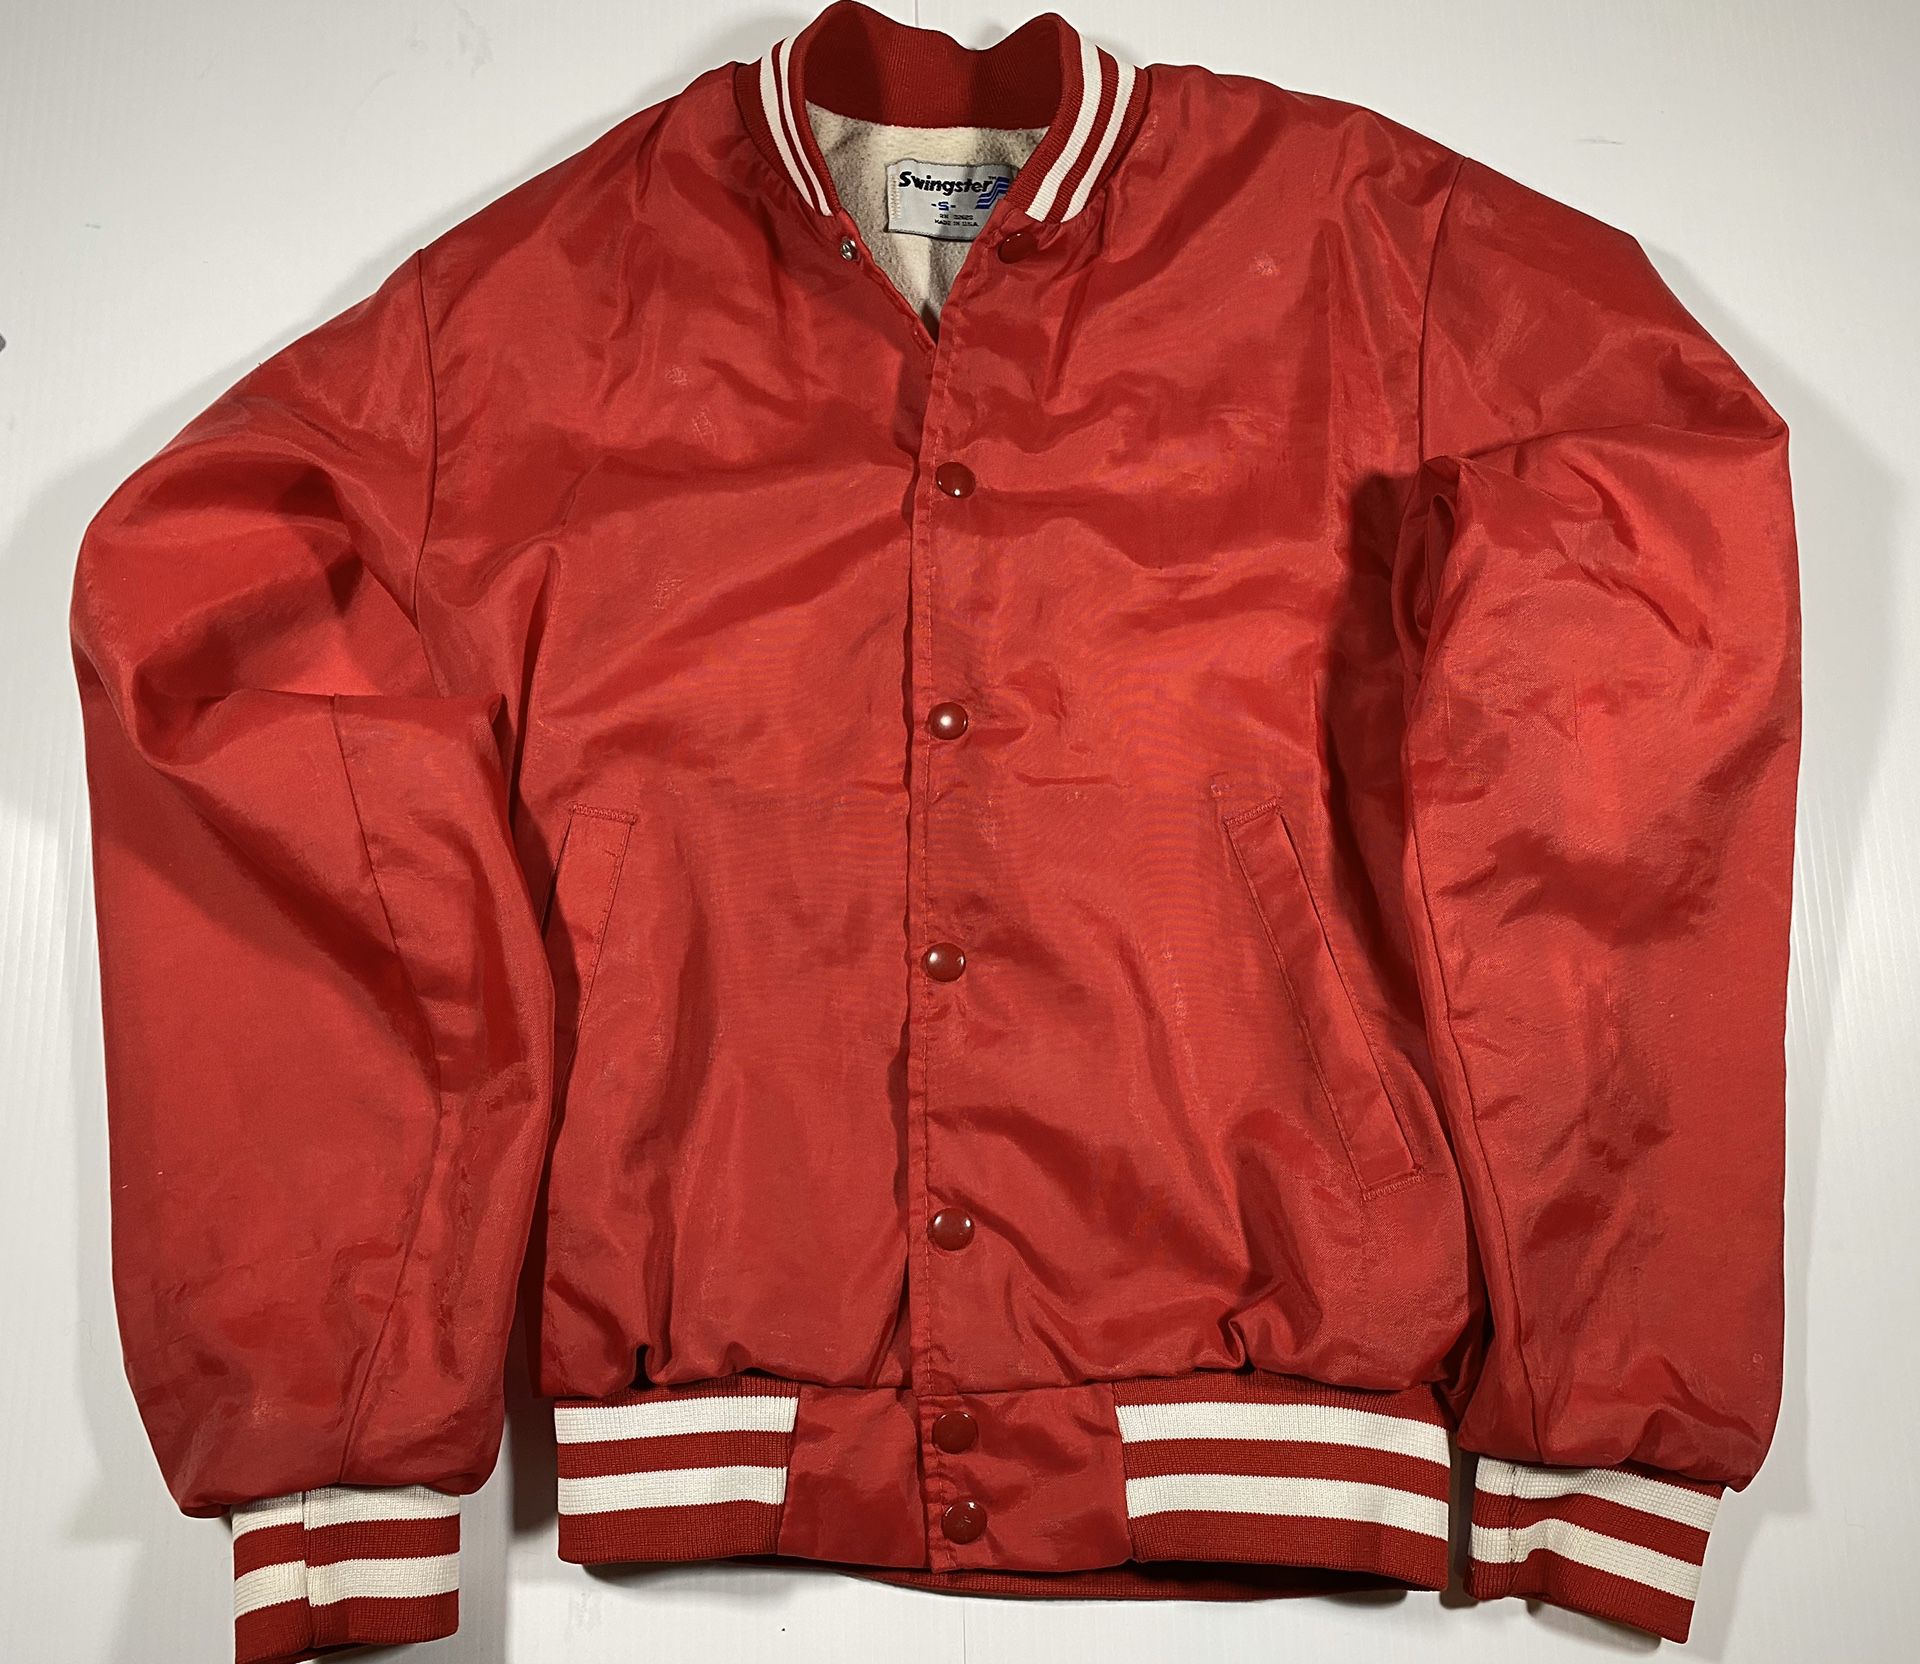 Swingster jacket small red Vintage Snaps (No Logos, Clean Jacket, Great Cond.)